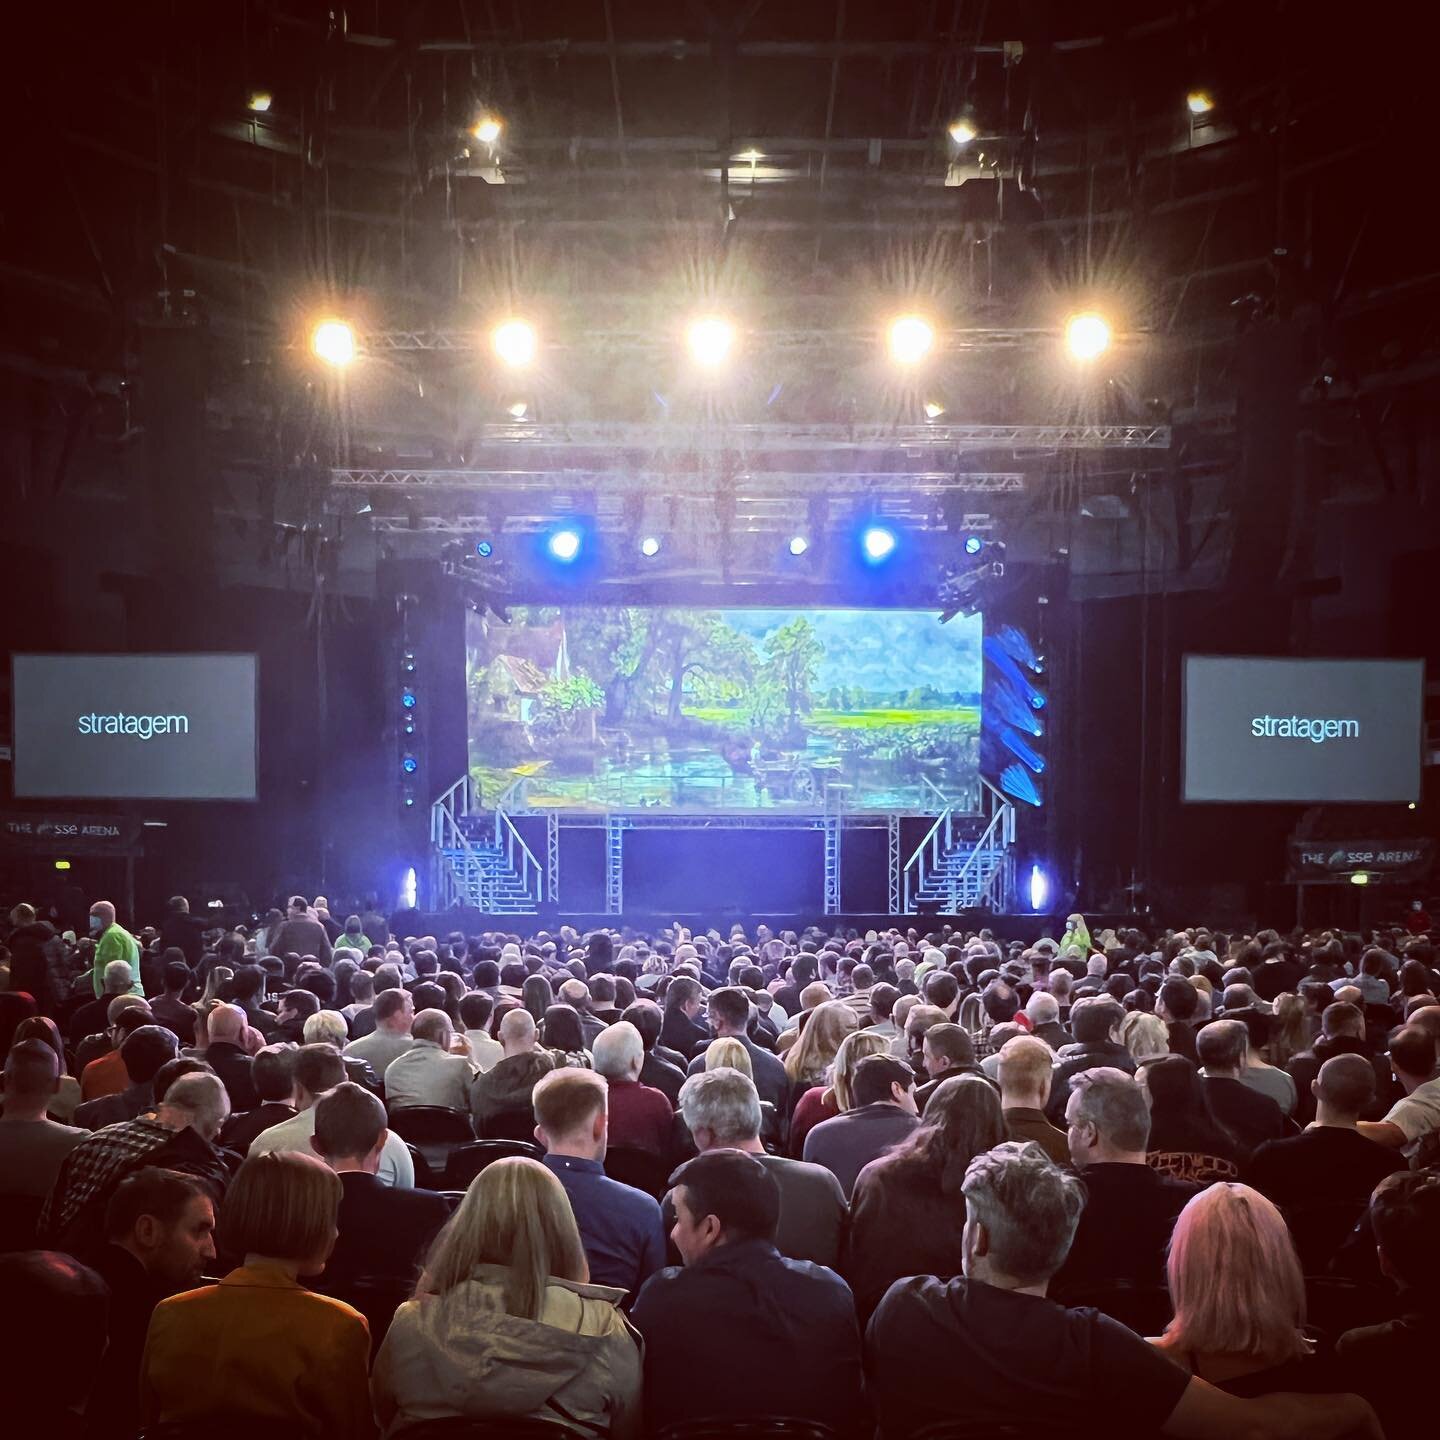 First show of the new Alan Partridge tour #stratagem @thessearenabelfast 

@theaccidentalpartridge #videodesign #videodesigner #projection #projectiondesign #designer #alanpartridge @mcintyre_live